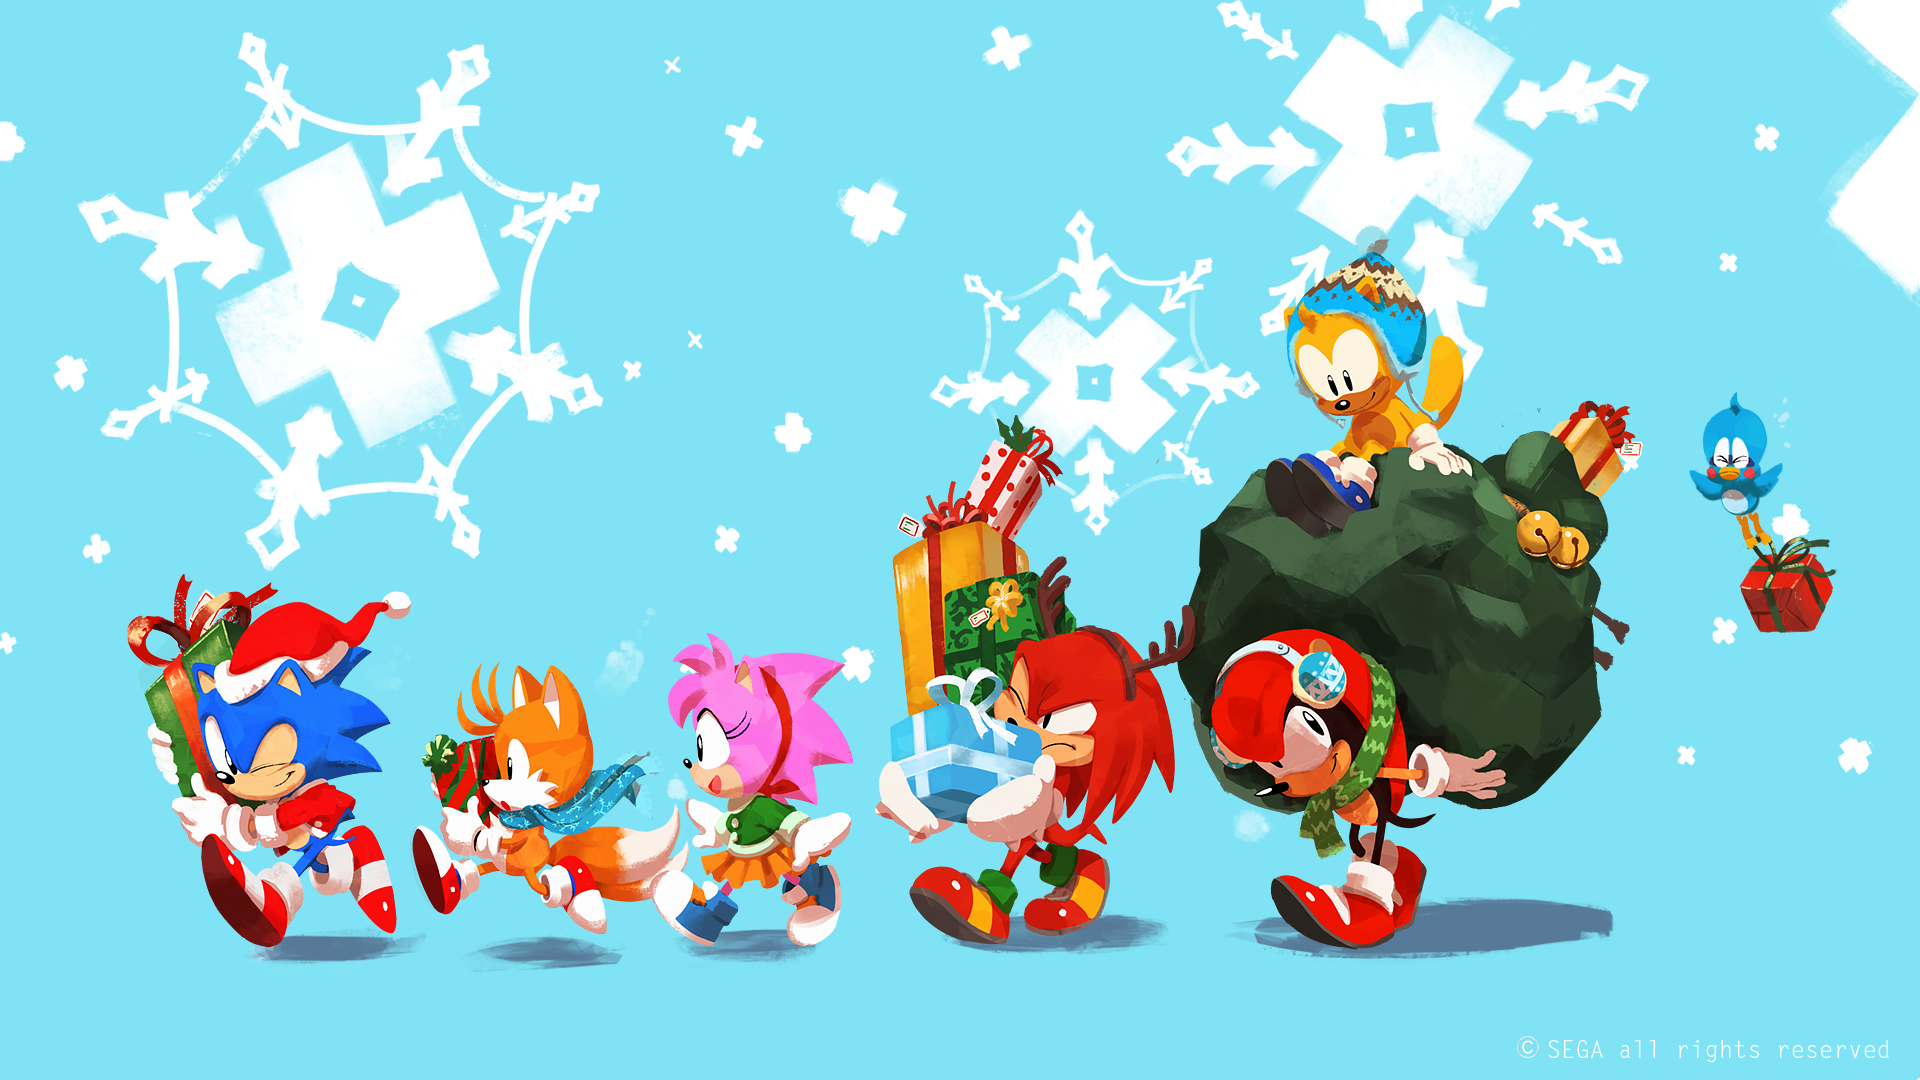 General 1920x1080 Sonic Sonic the Hedgehog Sonic Mania Sonic Mania Adventures Sega PC gaming video game art holiday Christmas Christmas clothes Christmas presents christmas dress Amy Rose Tails (character) Knuckles Mighty winter snowflakes artwork video games